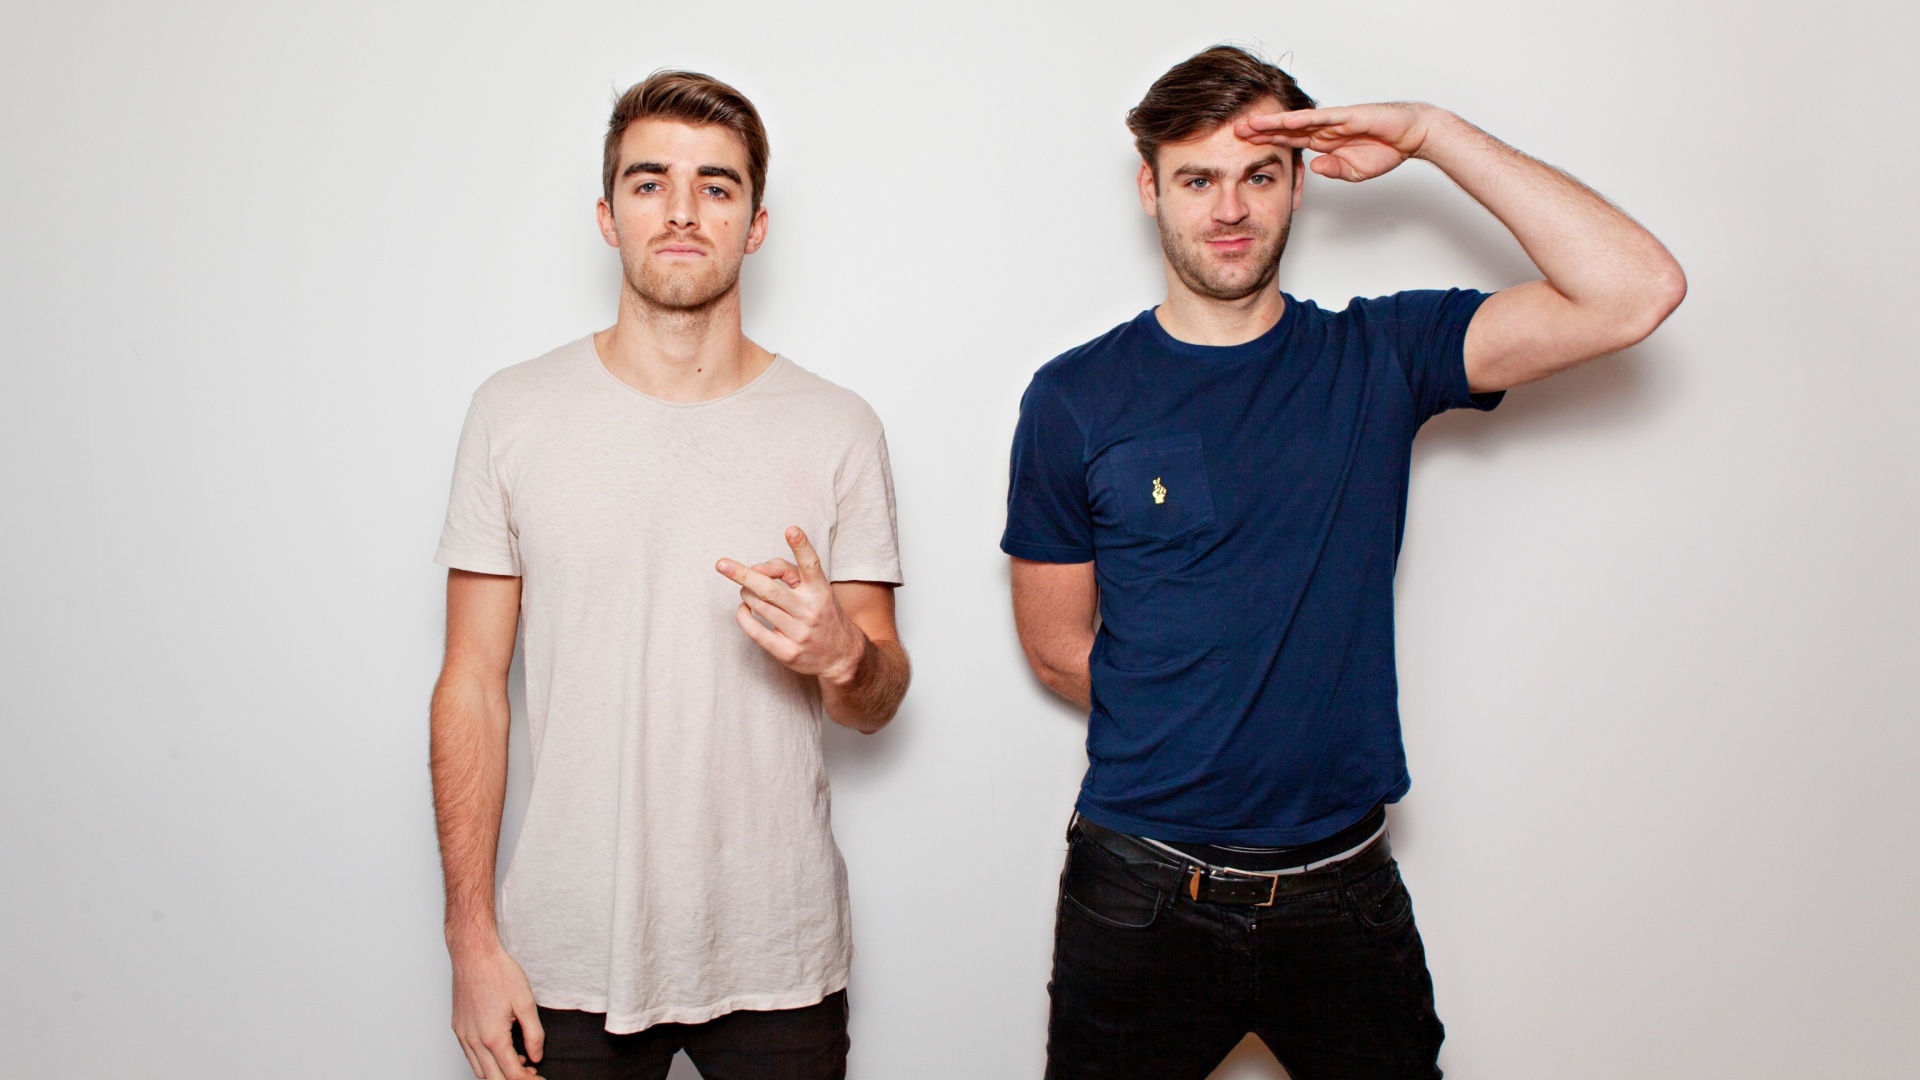 Fondo de pantalla The Chainsmokers with Andrew Taggart and Alex Pall 1920x1080